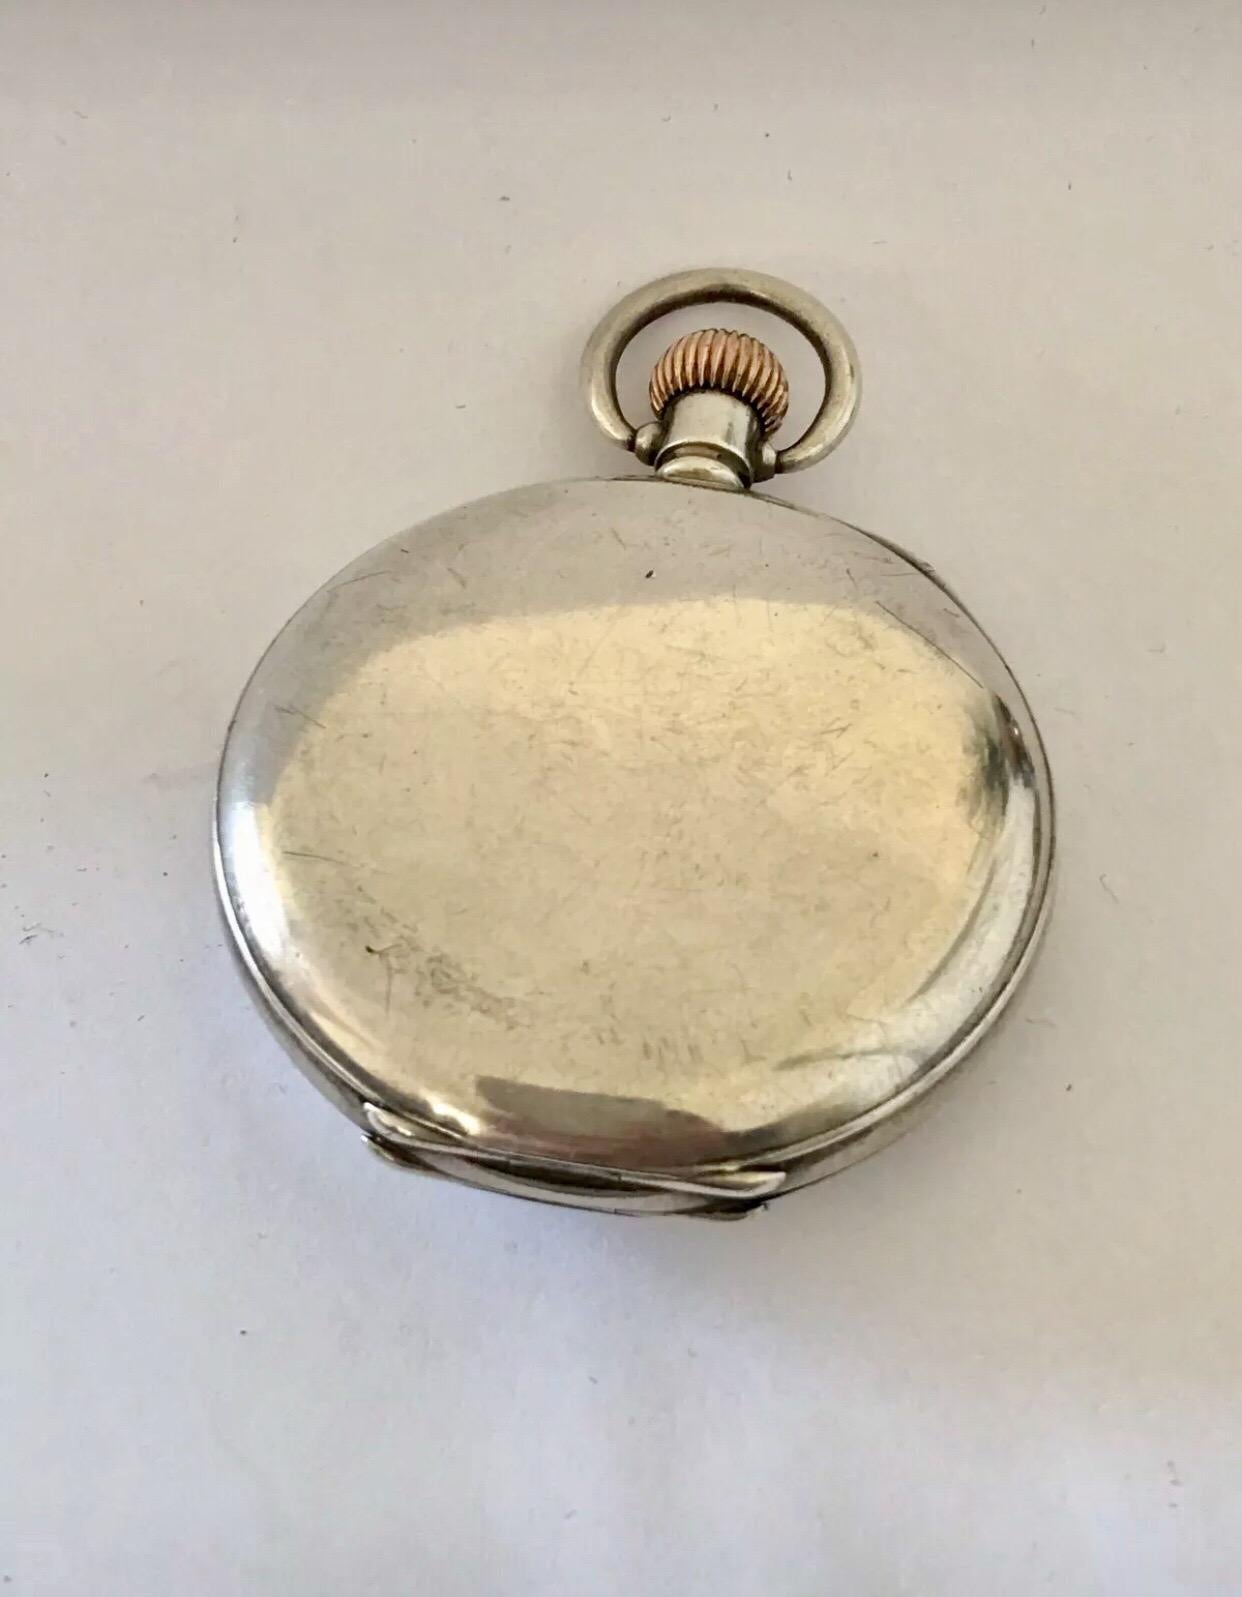 
This beautiful 54mm diameter half hunter silver keyless pocket watch is in good working condition and it is running well. A good sound heavy pocket watch. Visible signs of ageing and wear with light surface marks on the watch case as shown. Pease